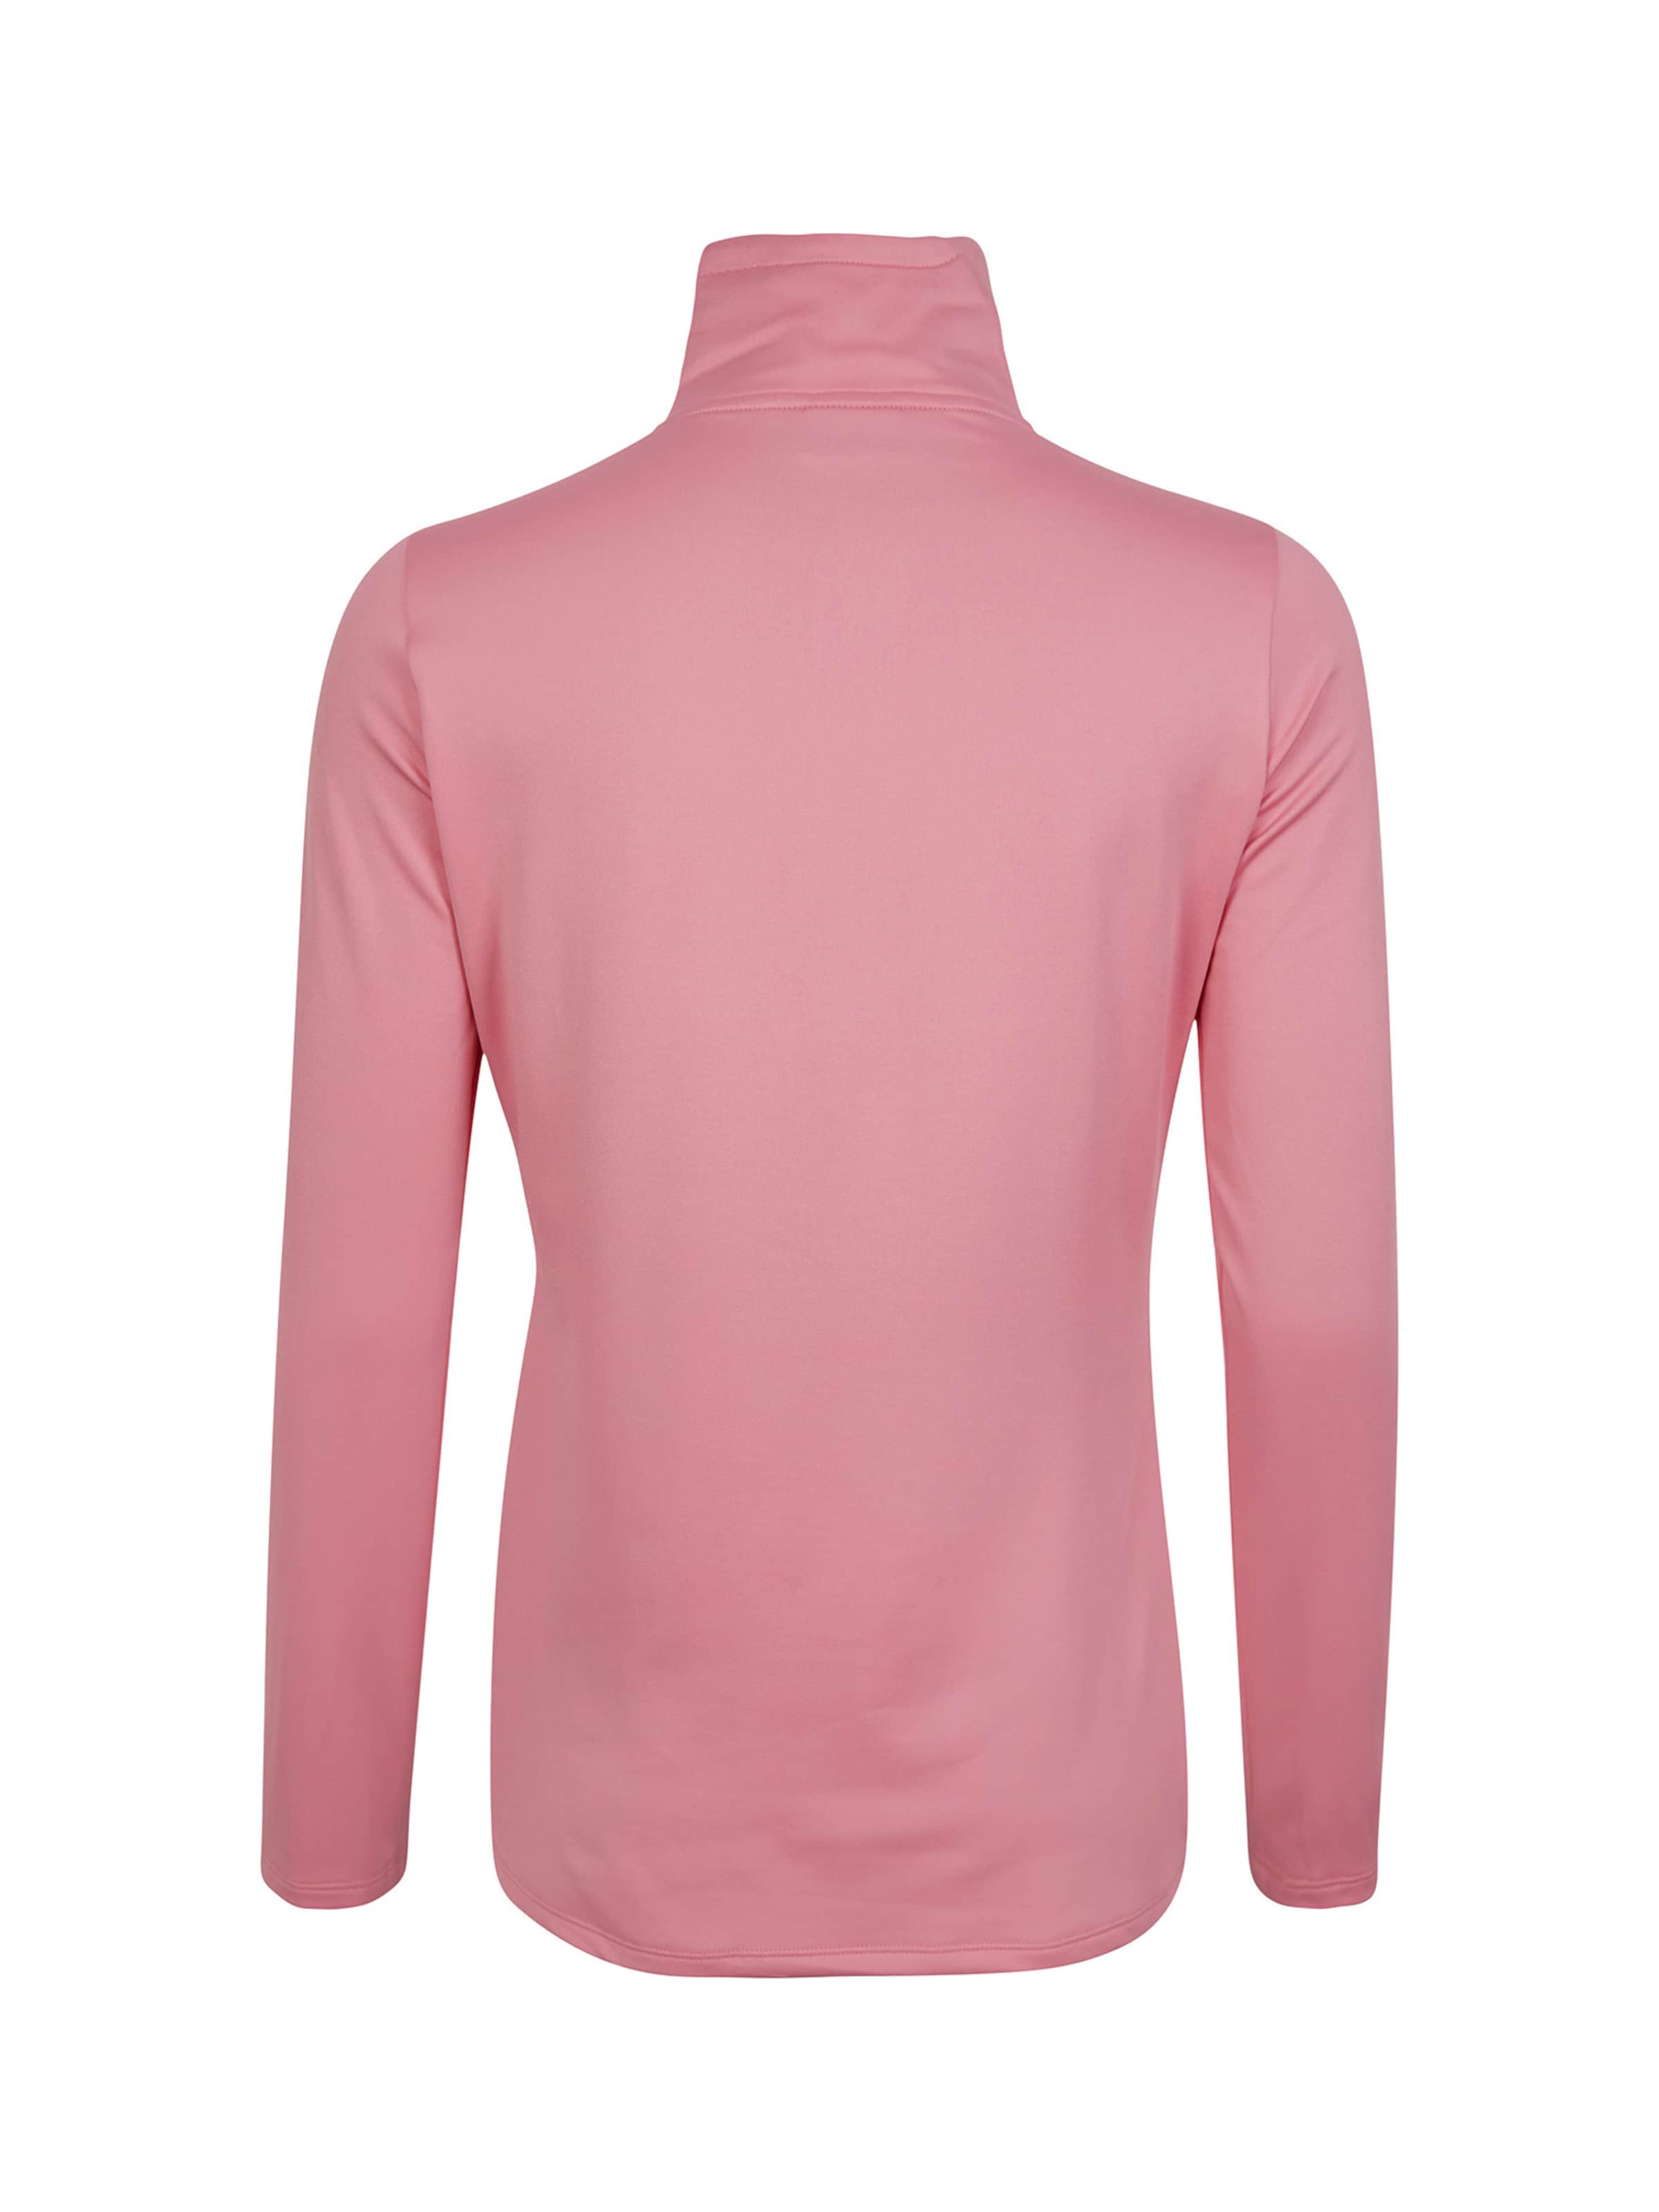 ONEILL Funktionsfleecejacke Clime in Rosa 